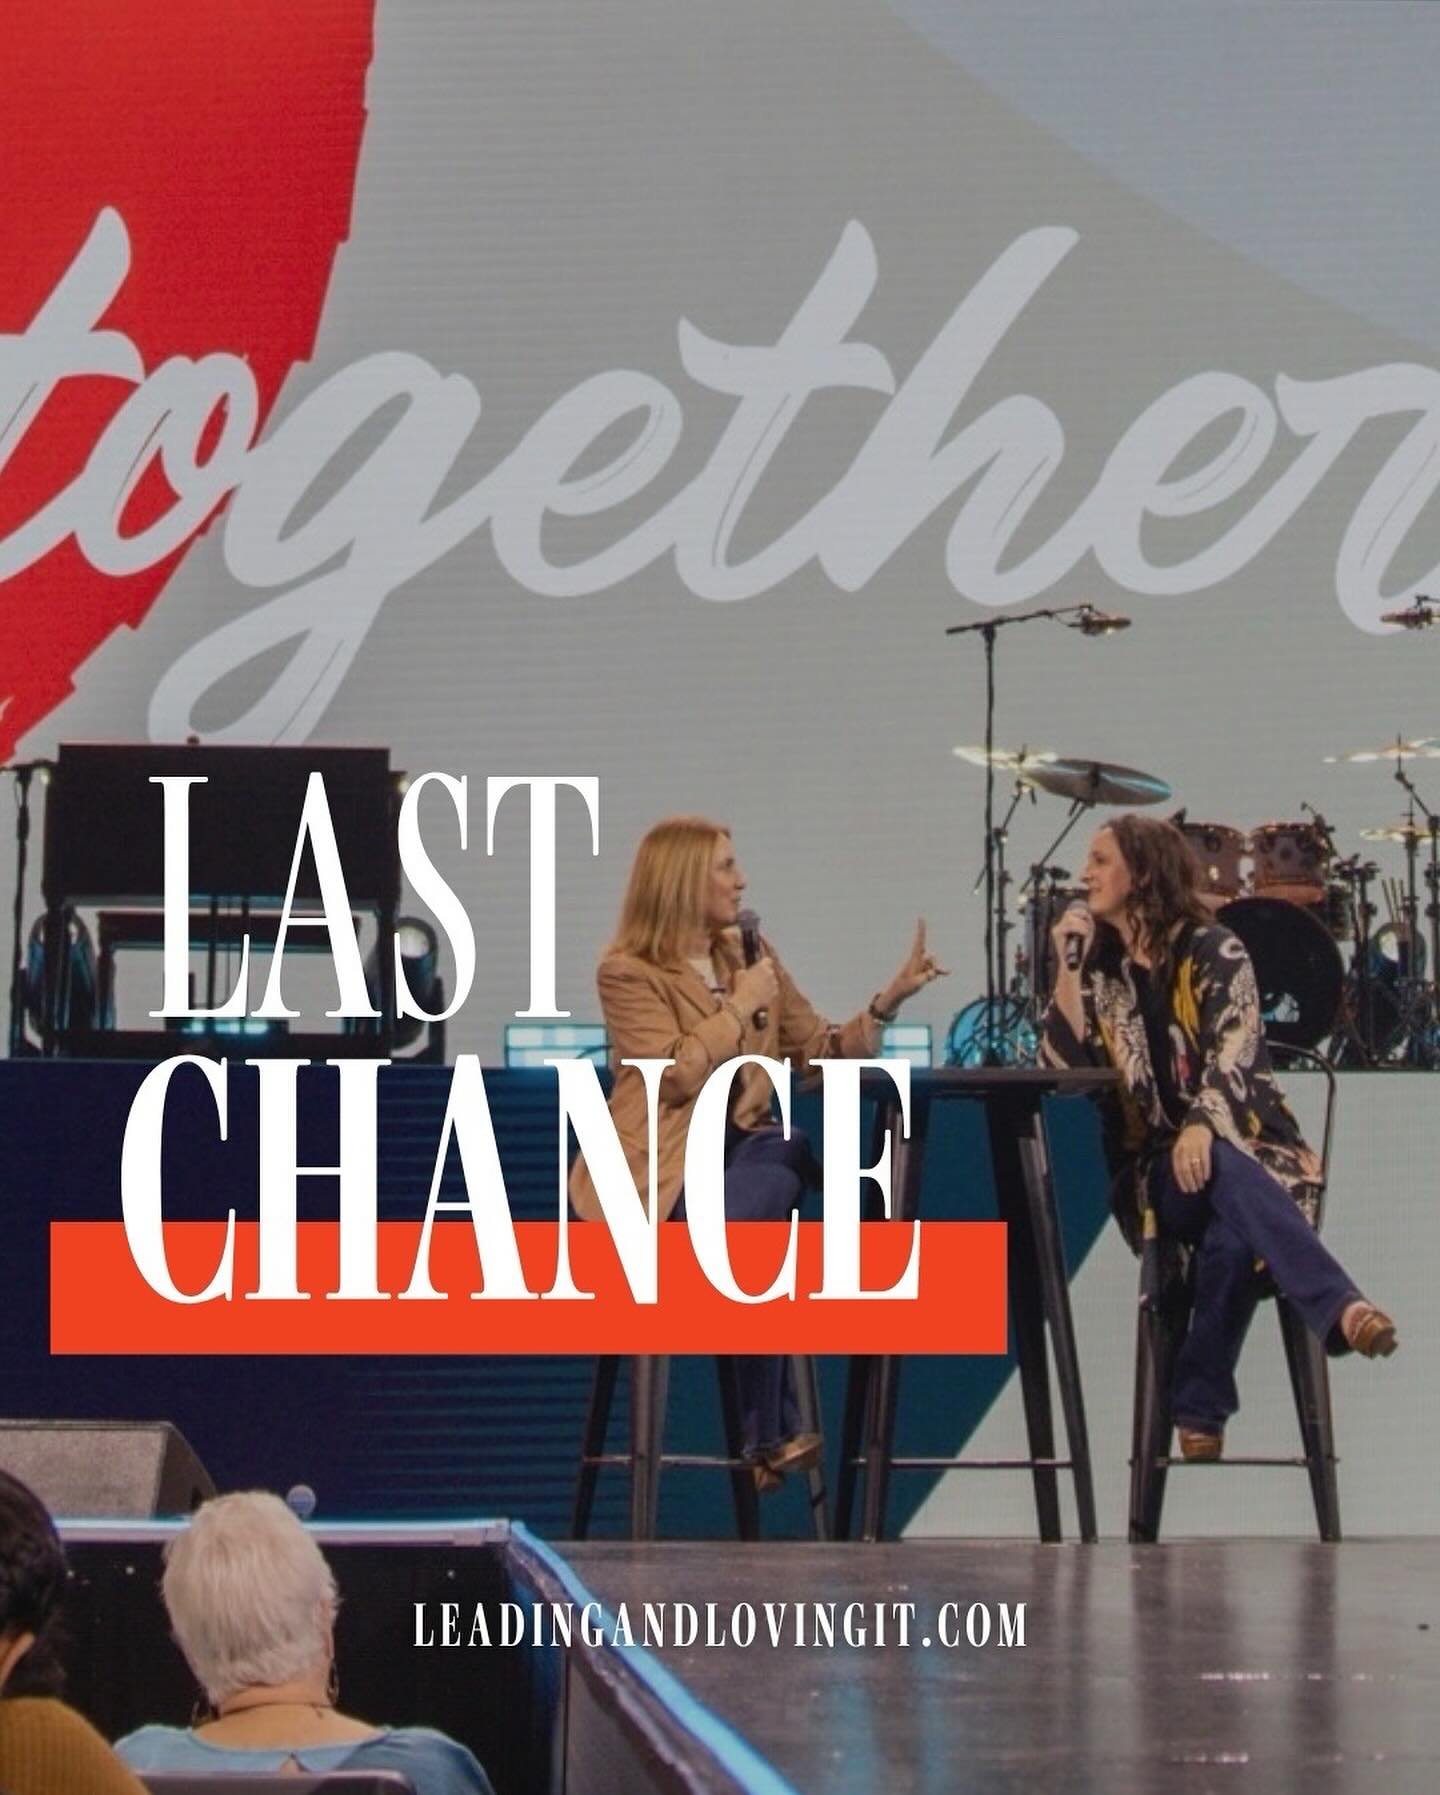 ⚡️LAST CHANCE&mdash;Registration for TOGETHER CLOSES TODAY!
⠀⠀⠀⠀⠀⠀⠀⠀⠀
We only open TOGETHER 4 times a year and registration closes tonight! We are praying for all of the women leaders God is going to bring into this community as we continue to lead s